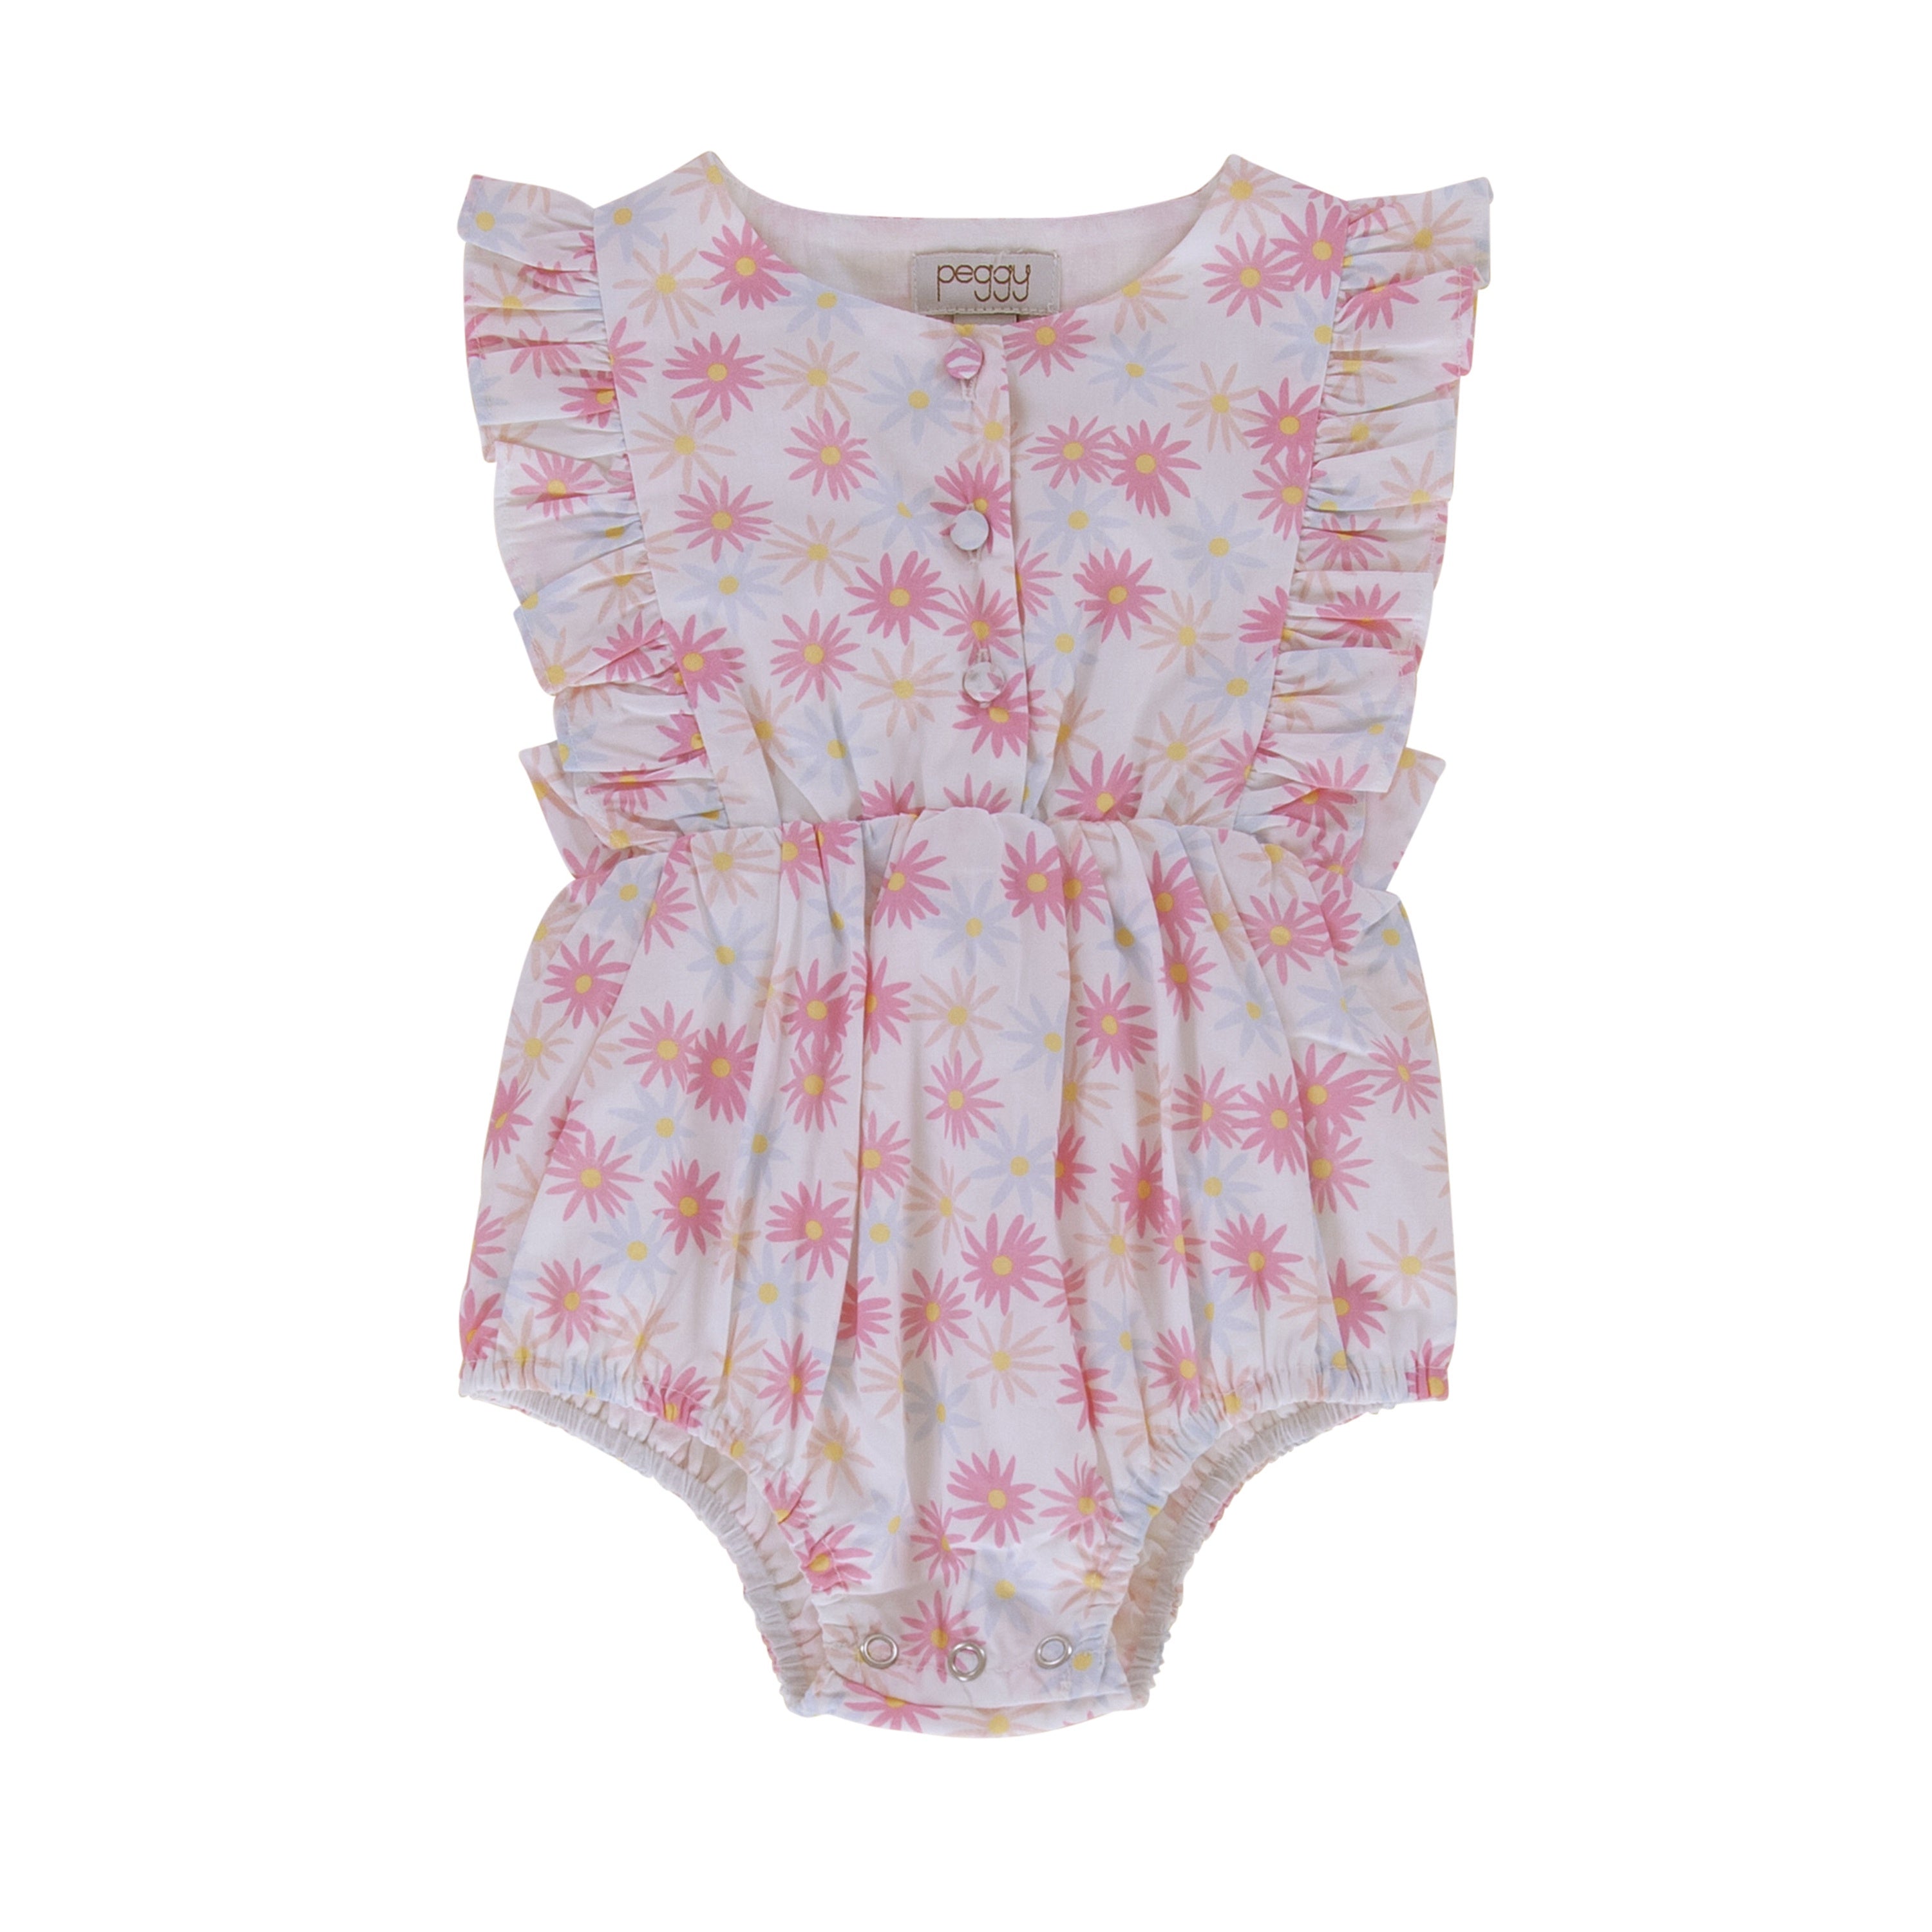 Peggy - August Playsuit - Betsy Peterson Daisy Print